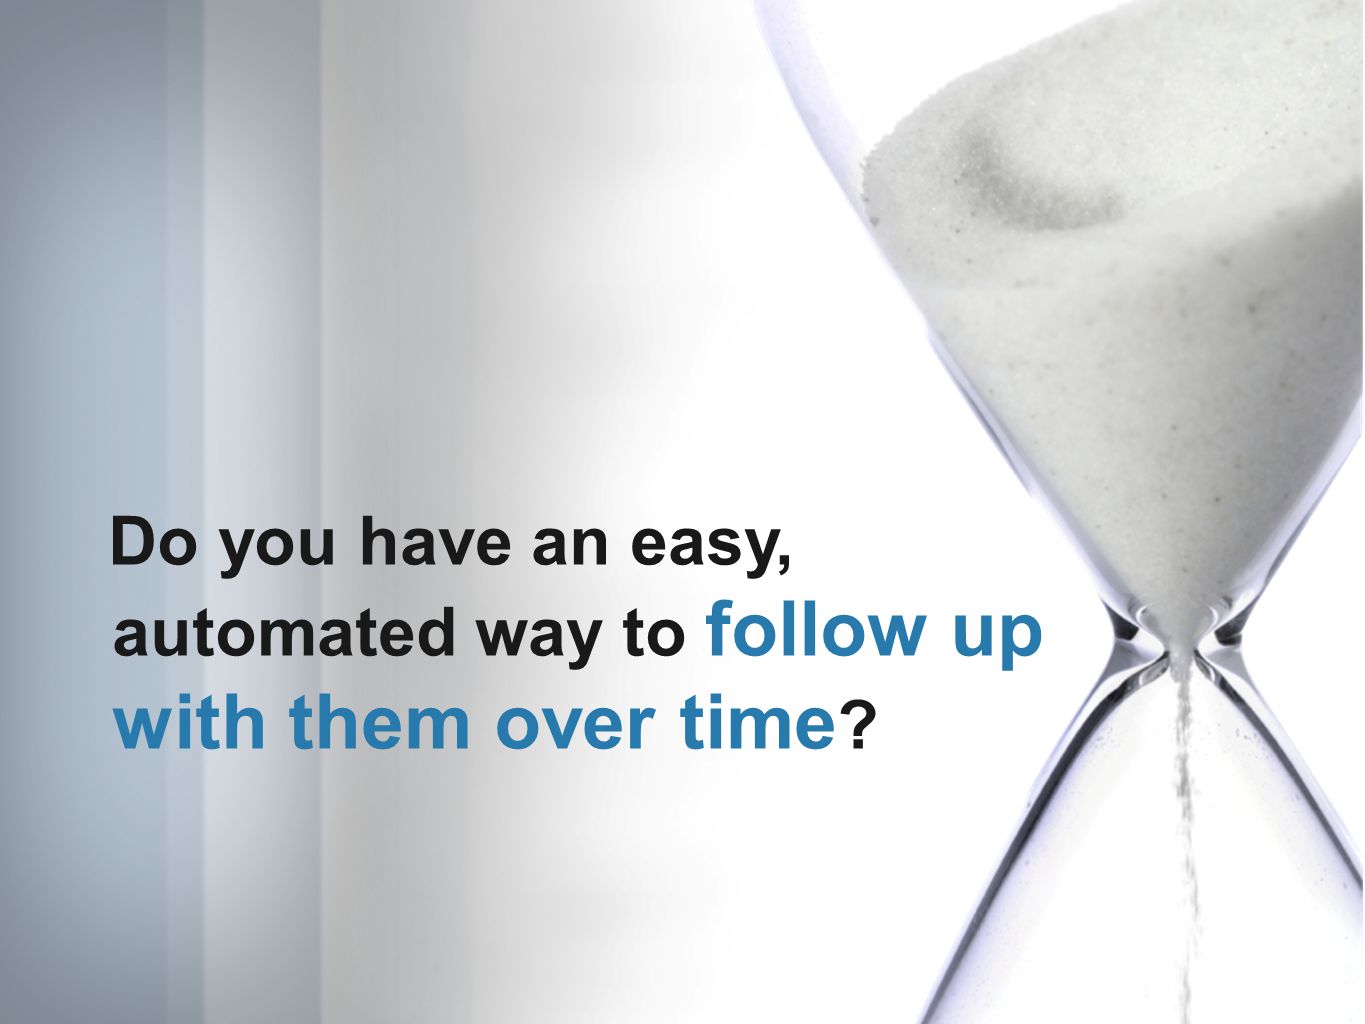 Do you have an easy, automated way to follow up with them over time